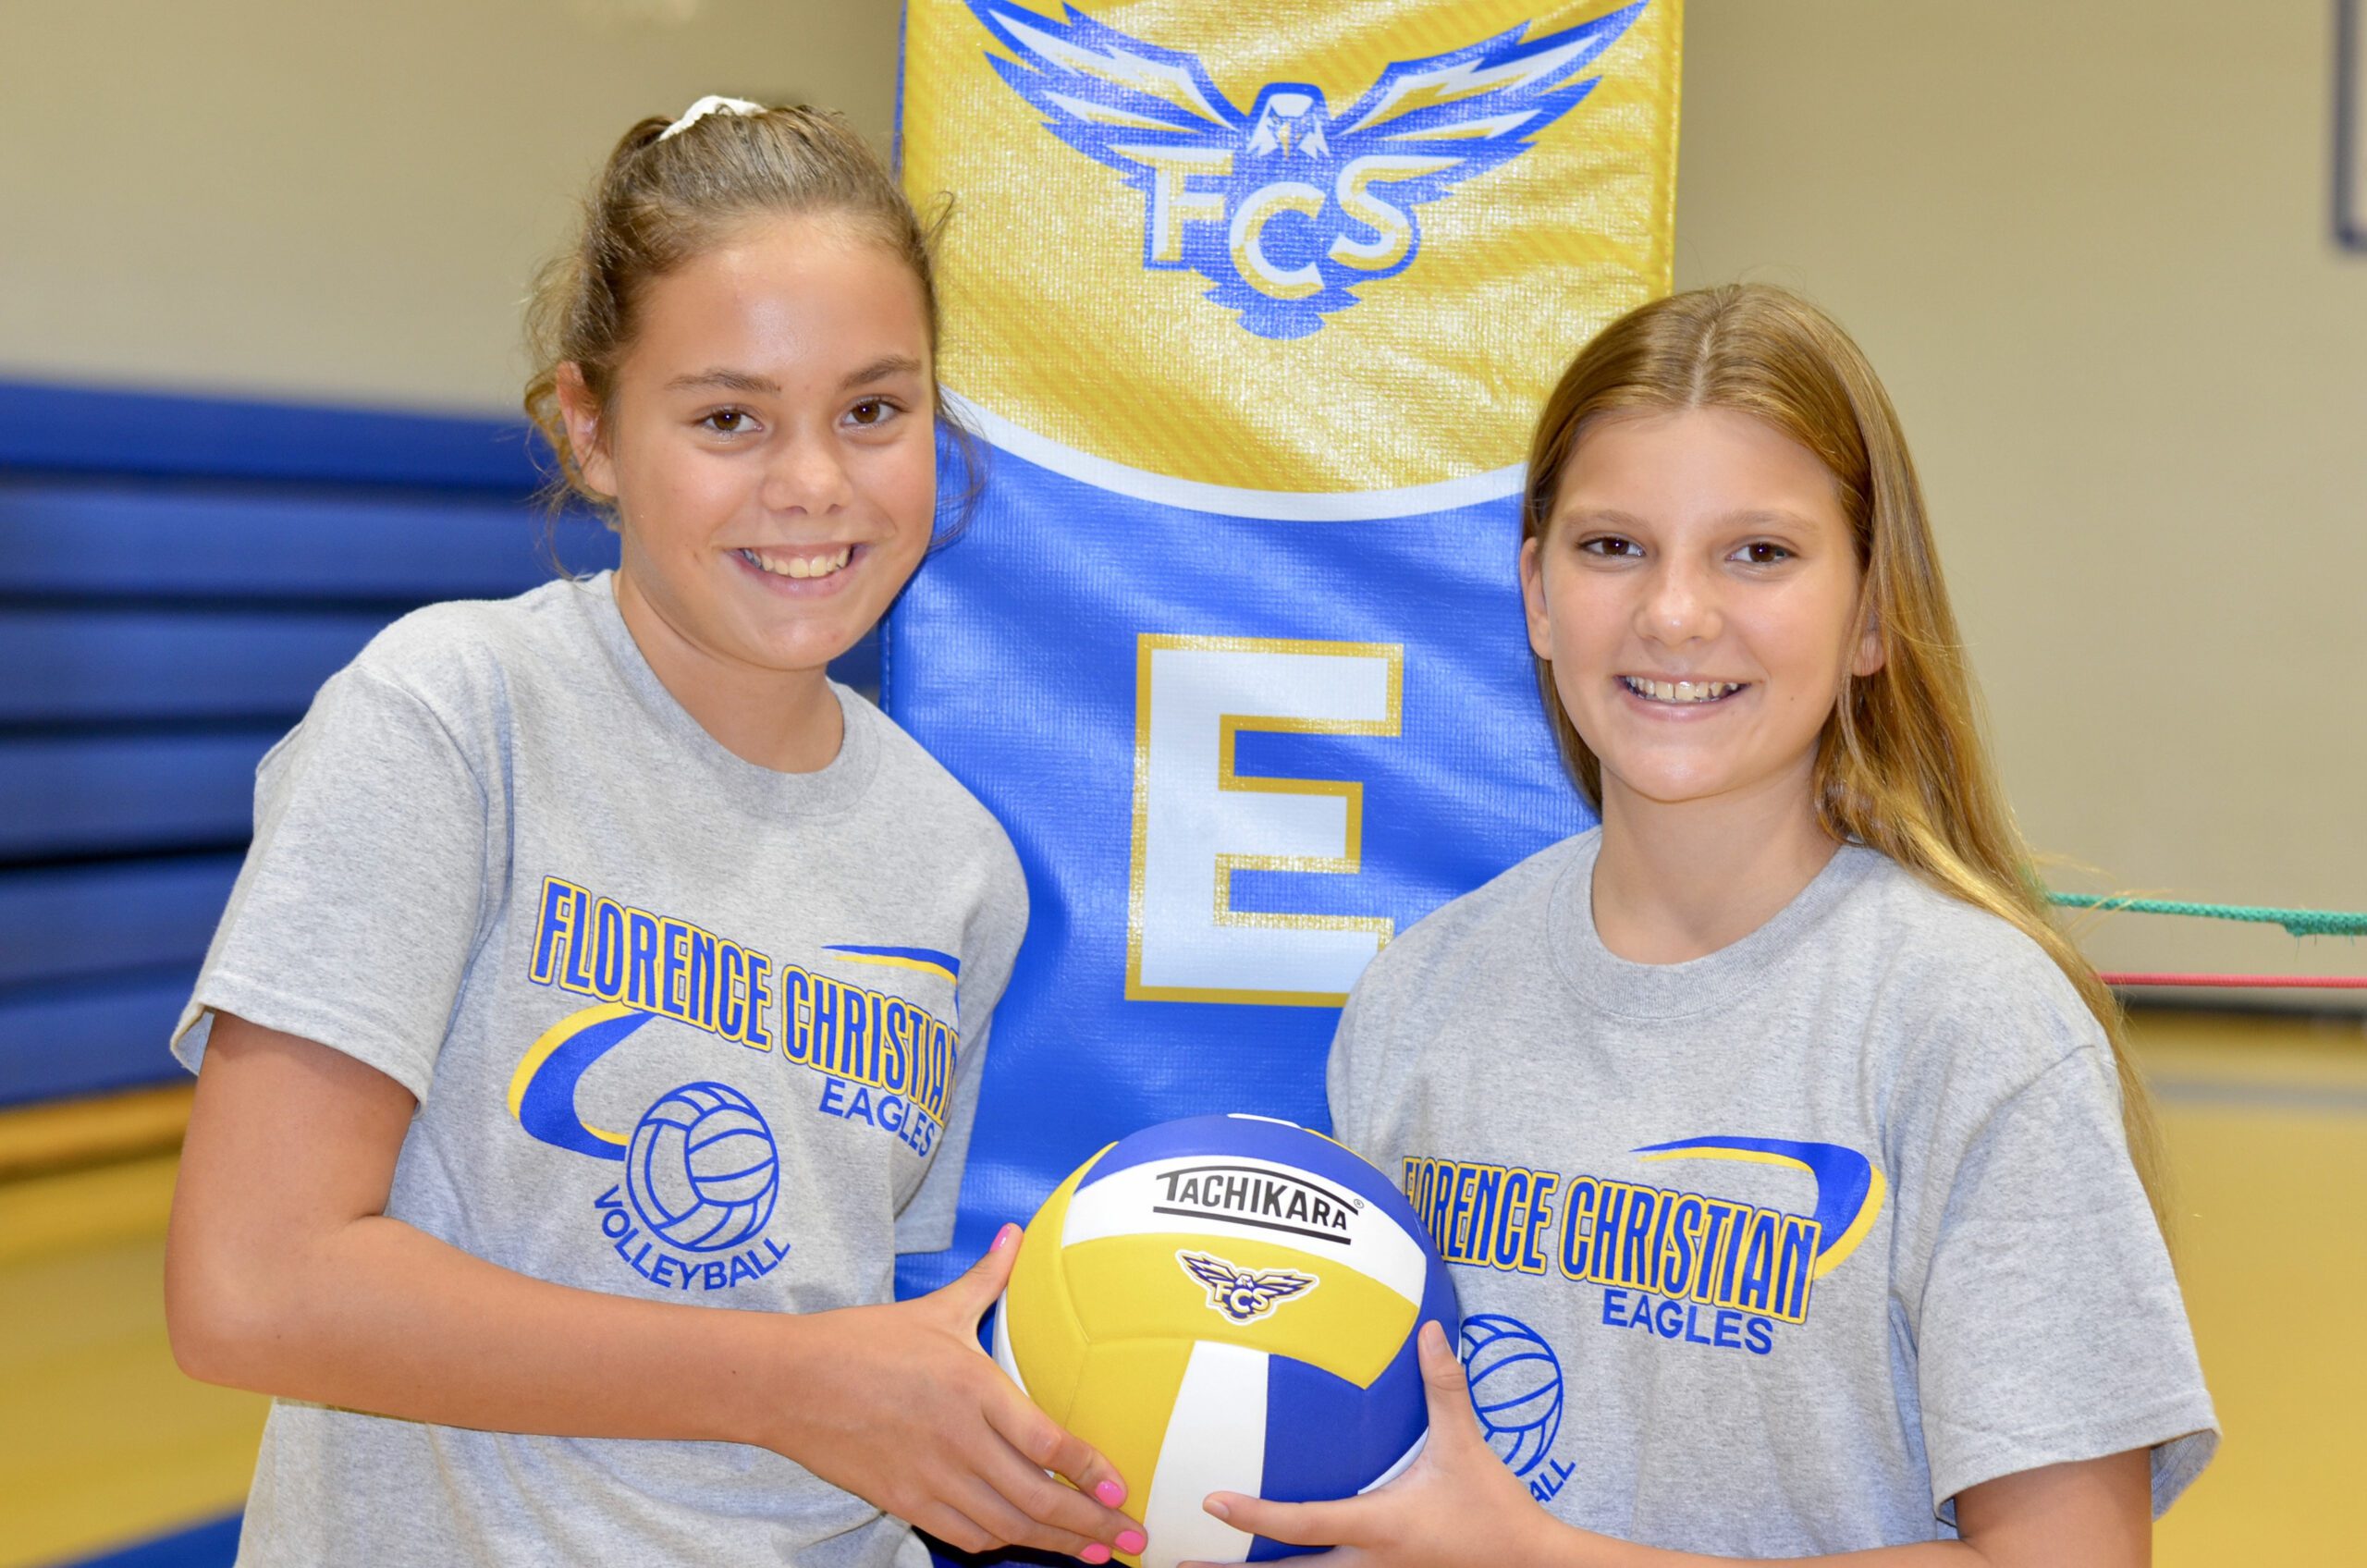 Two girls holding a volleyball at Florence Christian School